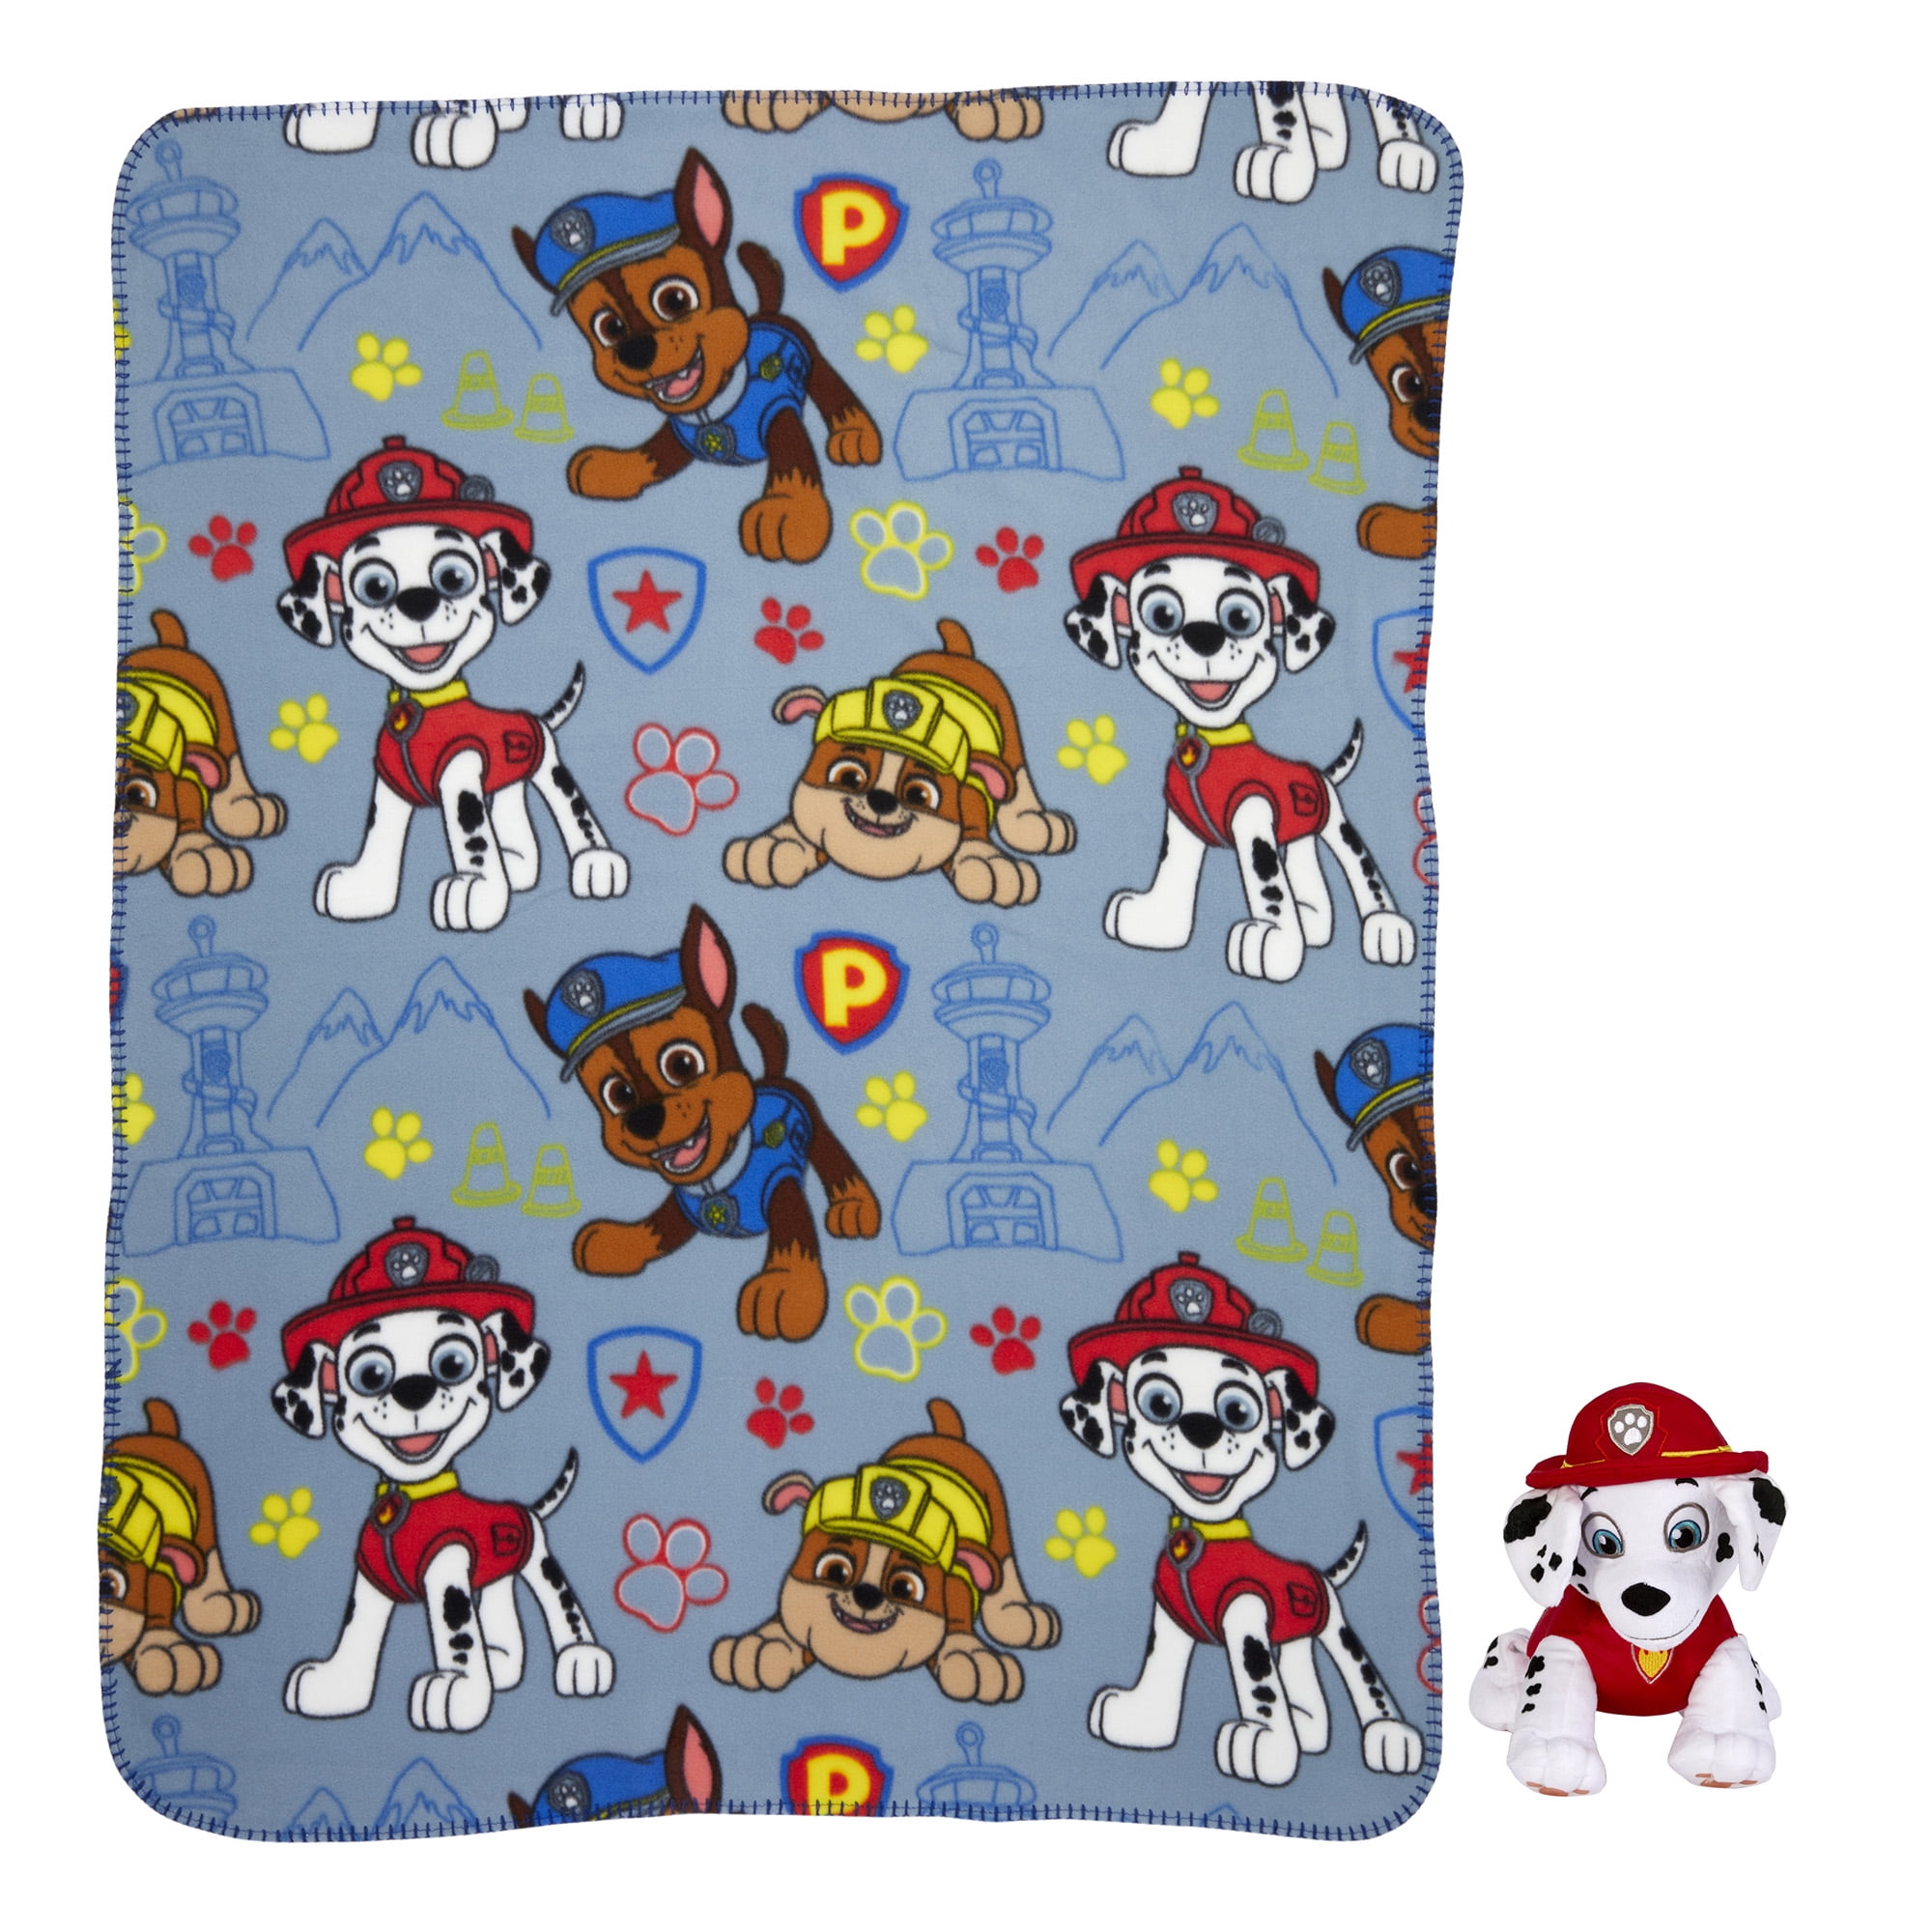 PAW PATROL FLEECE BLANKETS SKYE CHASE MARSHALL NEW CHILDRENS OFFICIAL FREE P+P 